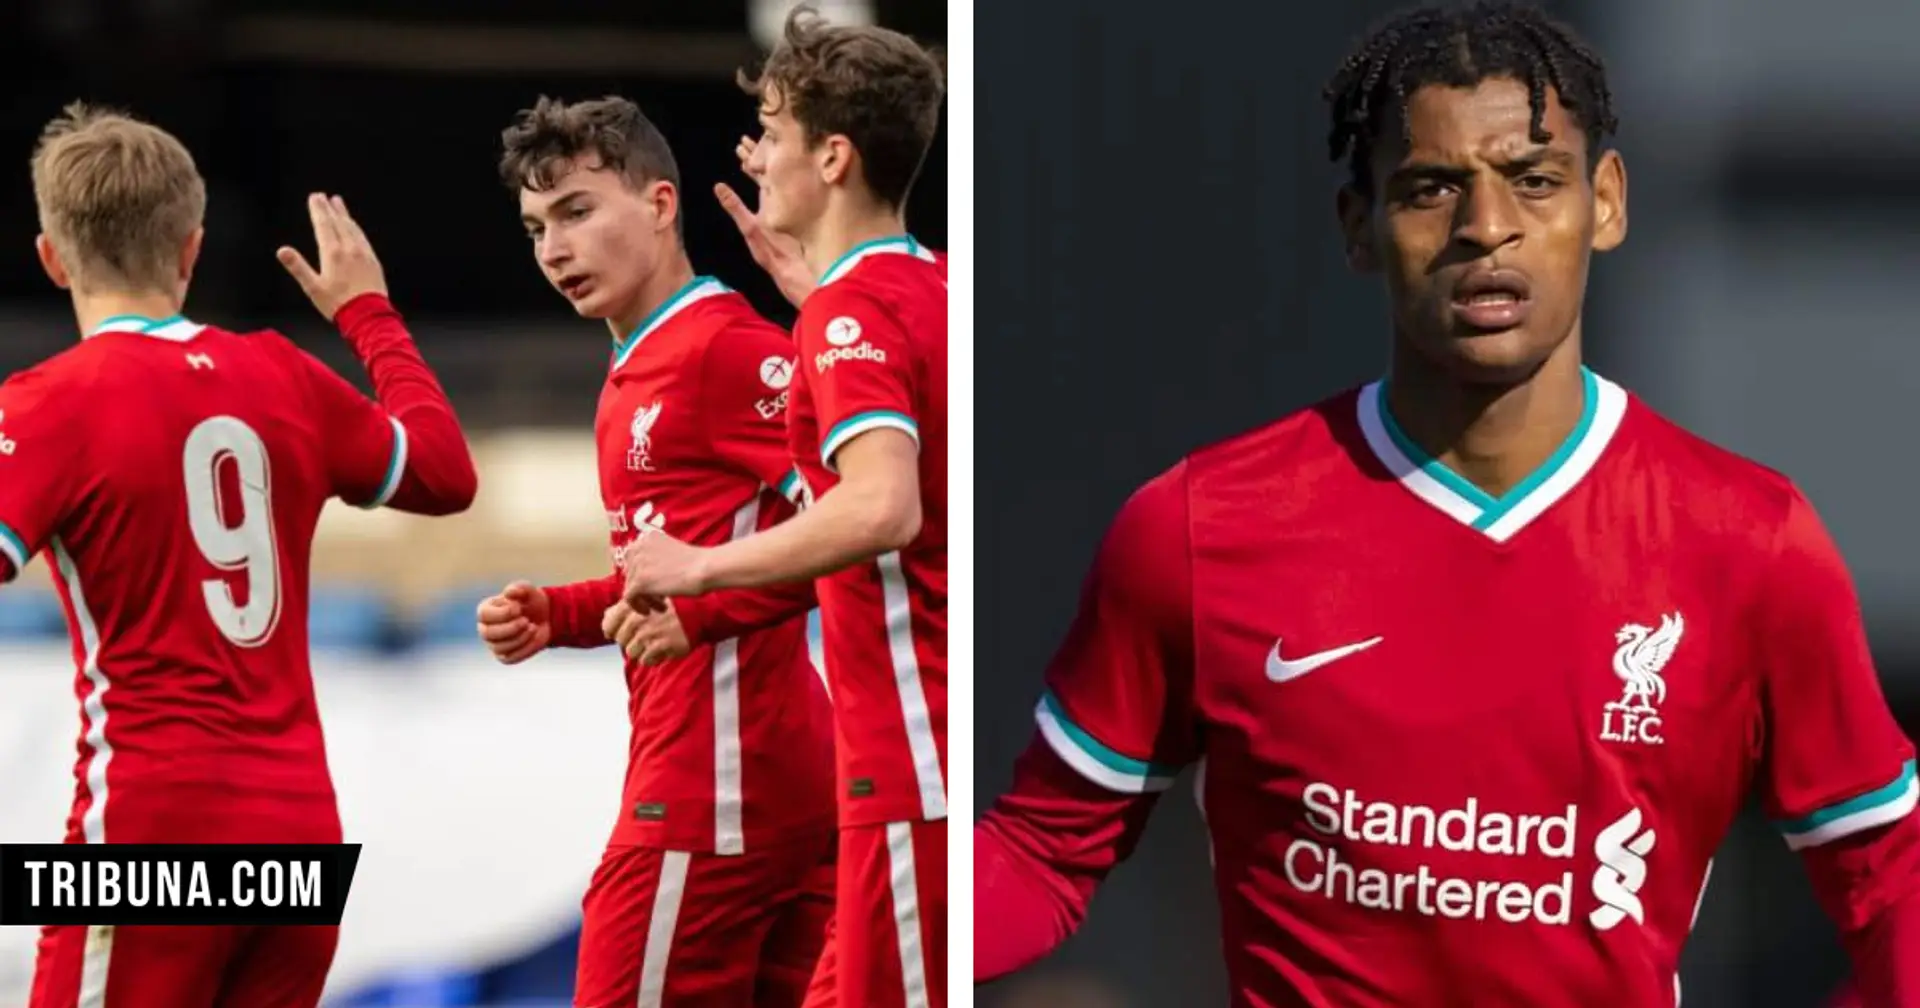 Liverpool U18s reach FA Youth Cup final with win over Ipswich